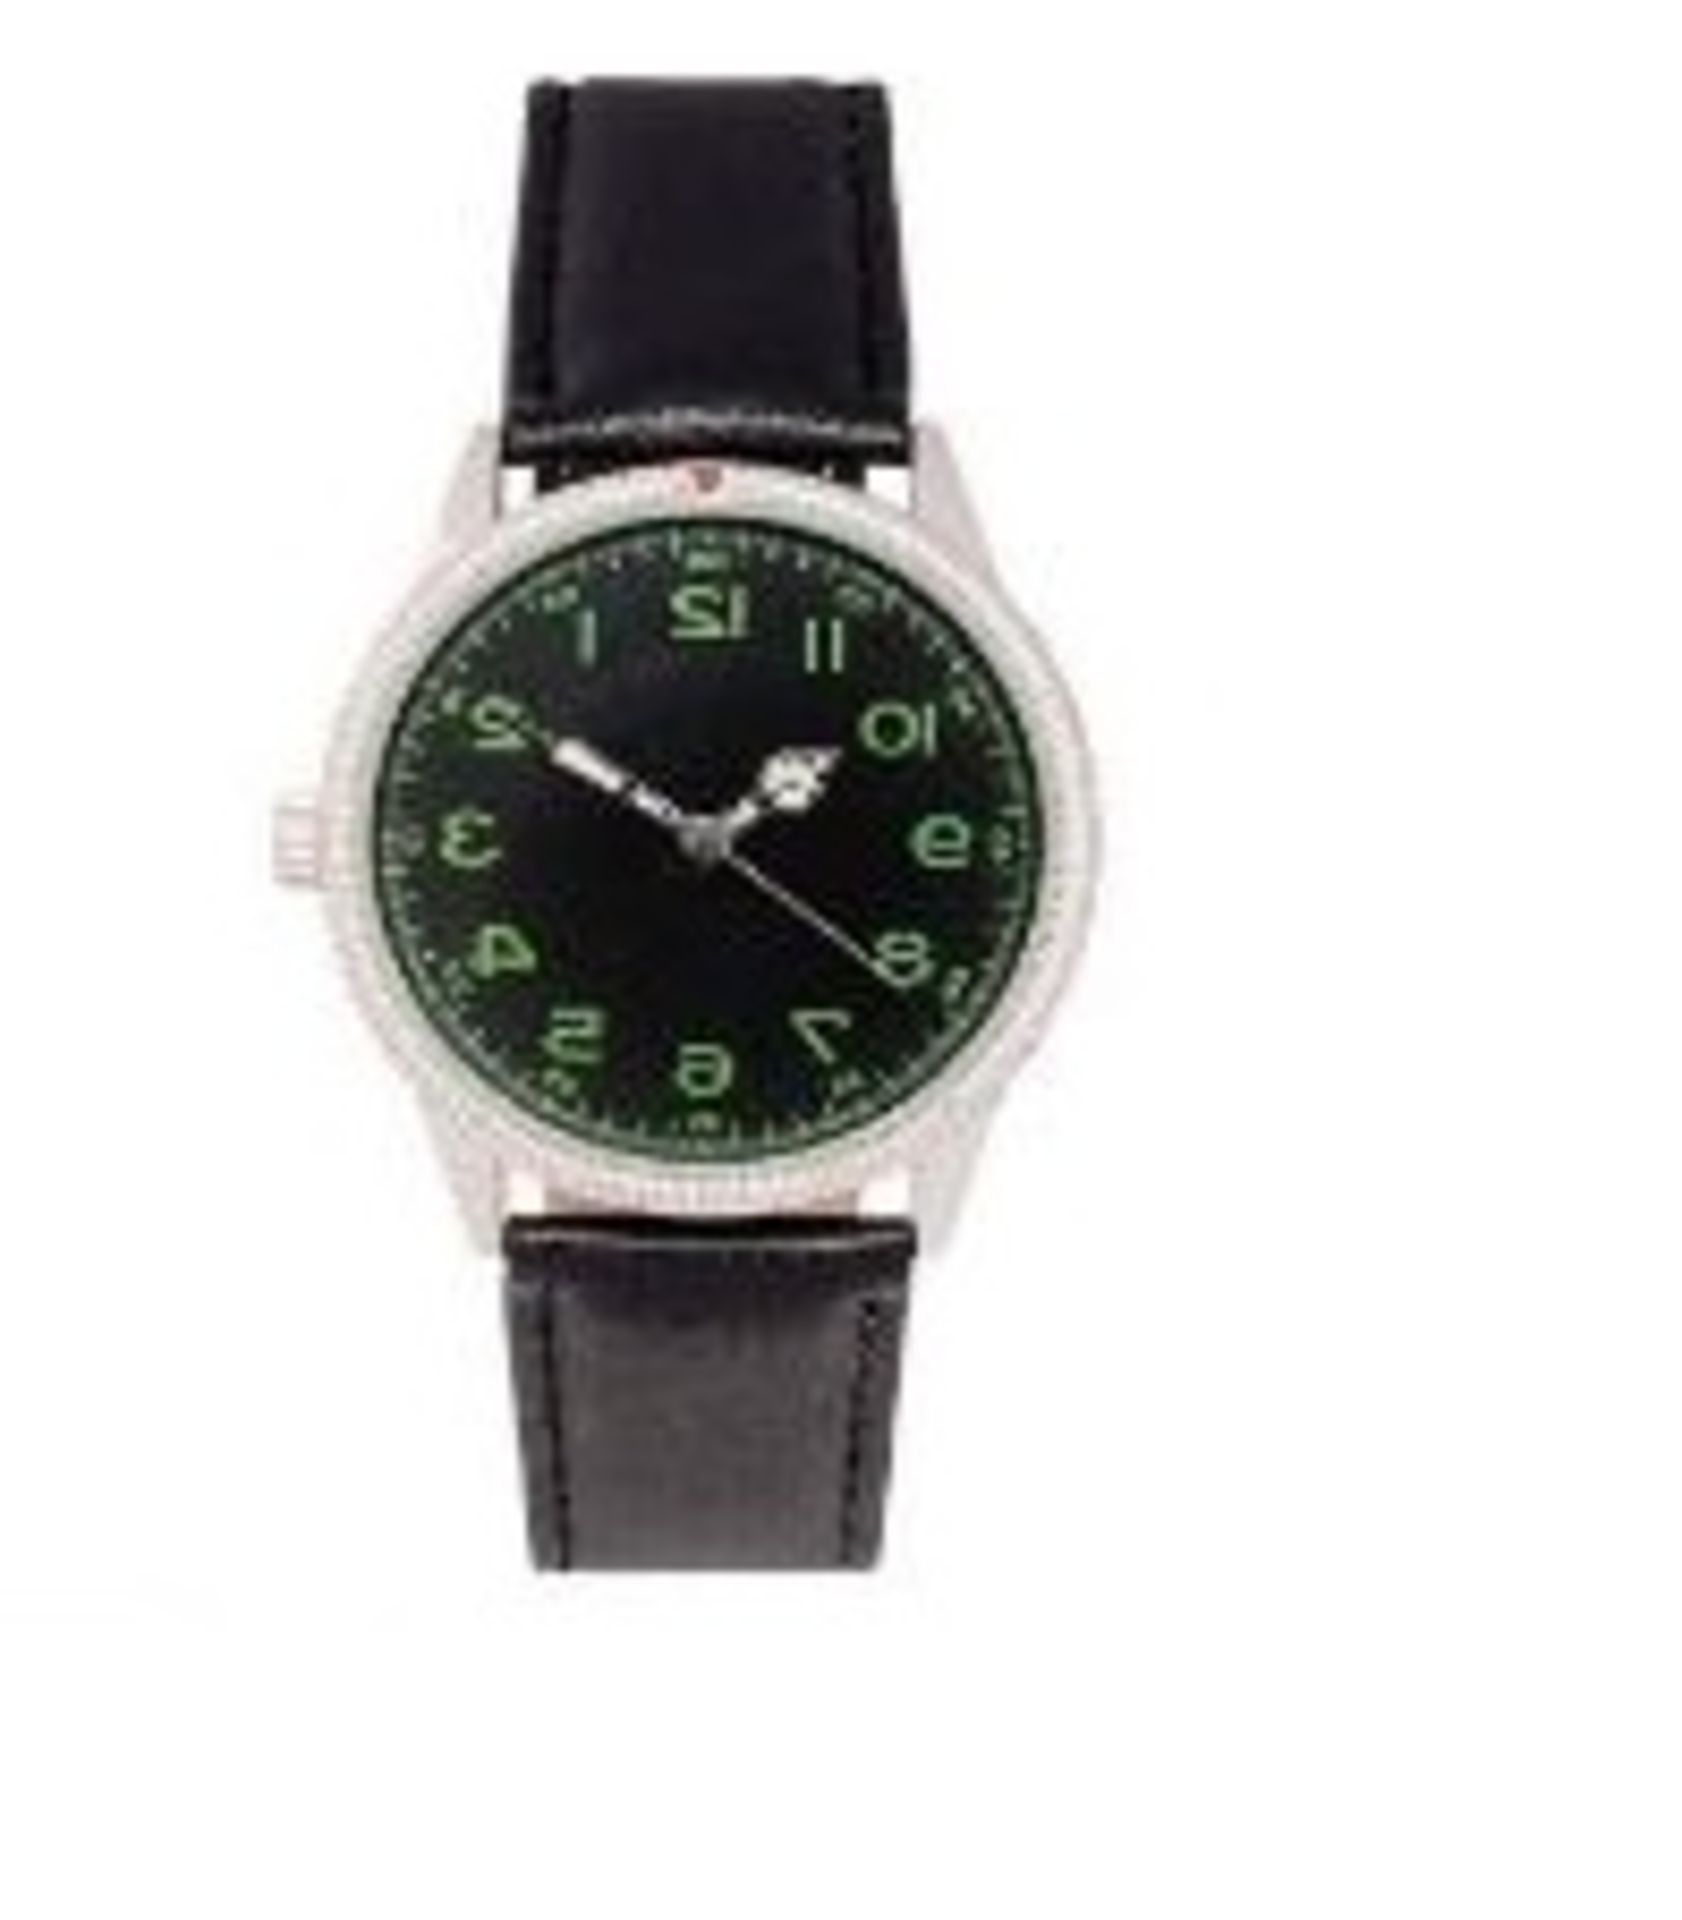 + VAT Brand New Gents 1940s French Pilots Watch With Engraved Back & Presentation Box